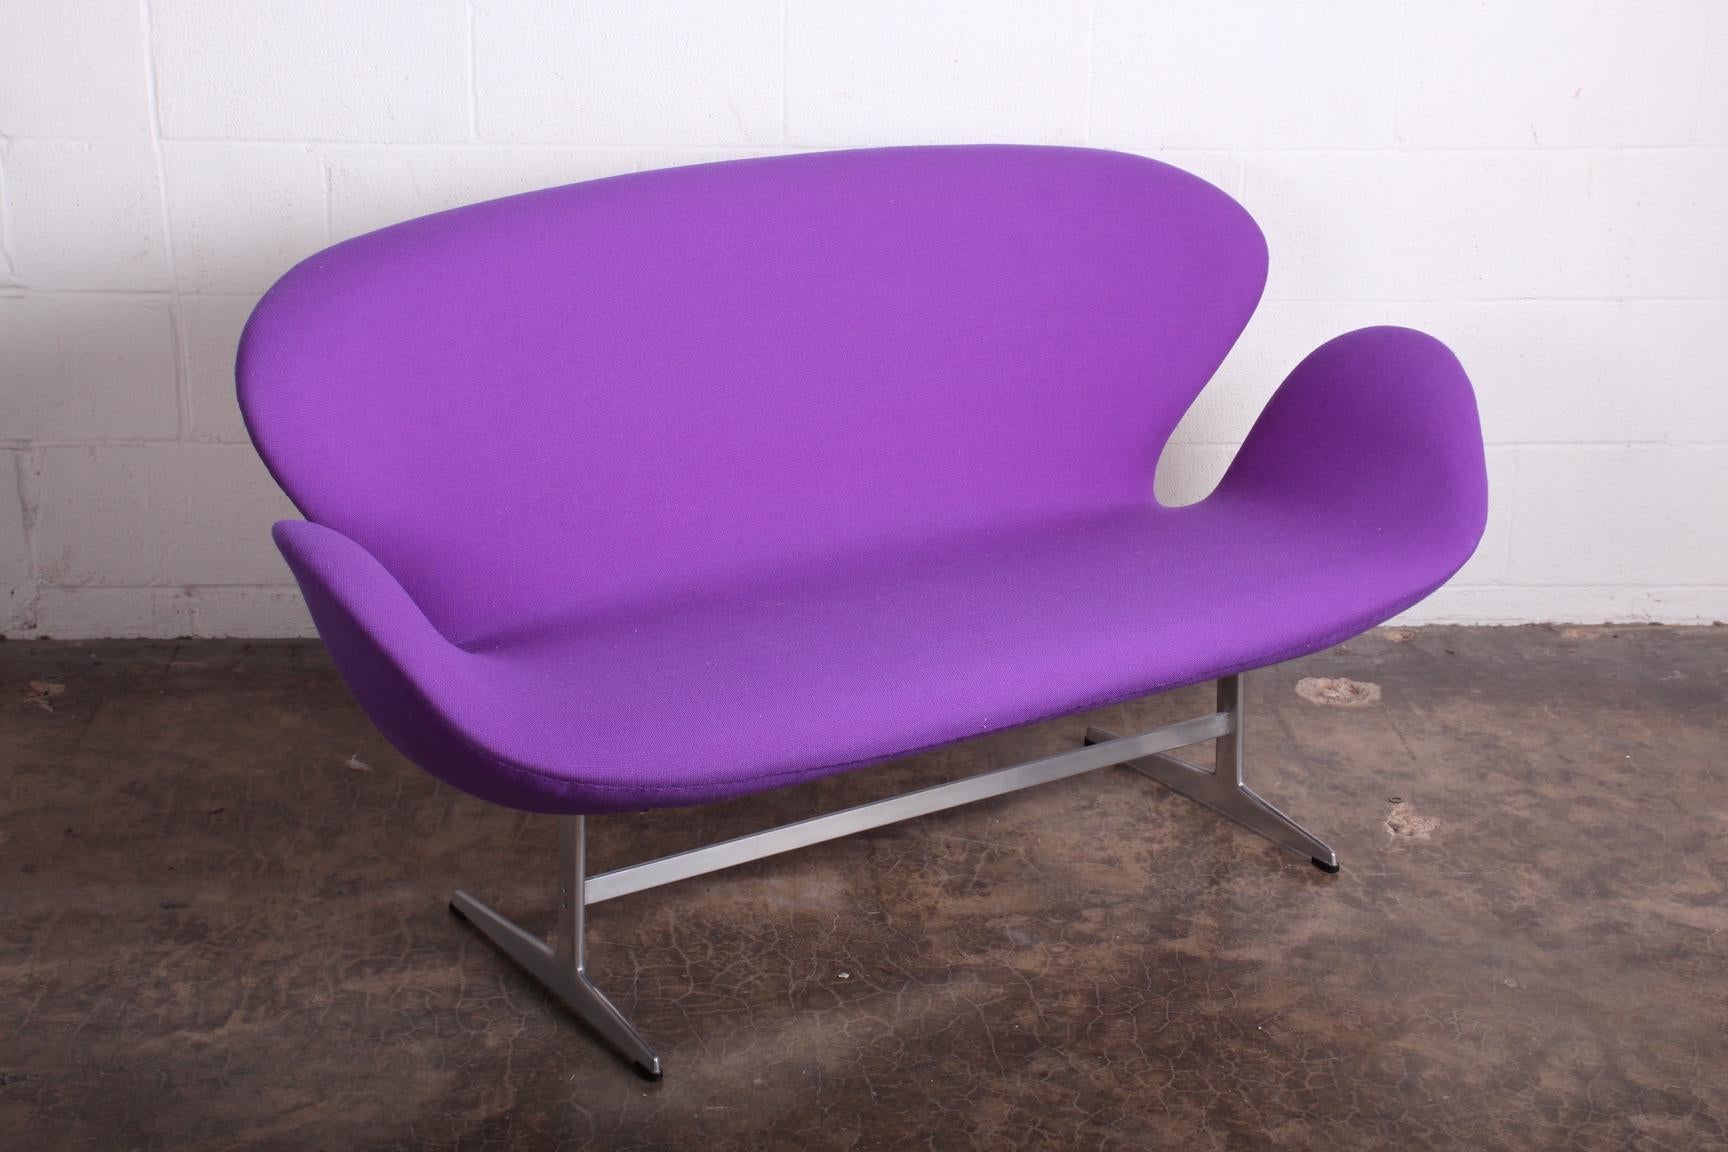 An original Swan settee, sofa, bench designed by Arne Jacobsen for Fritz Hansen. The purple fabric is an older restoration in very good condition.